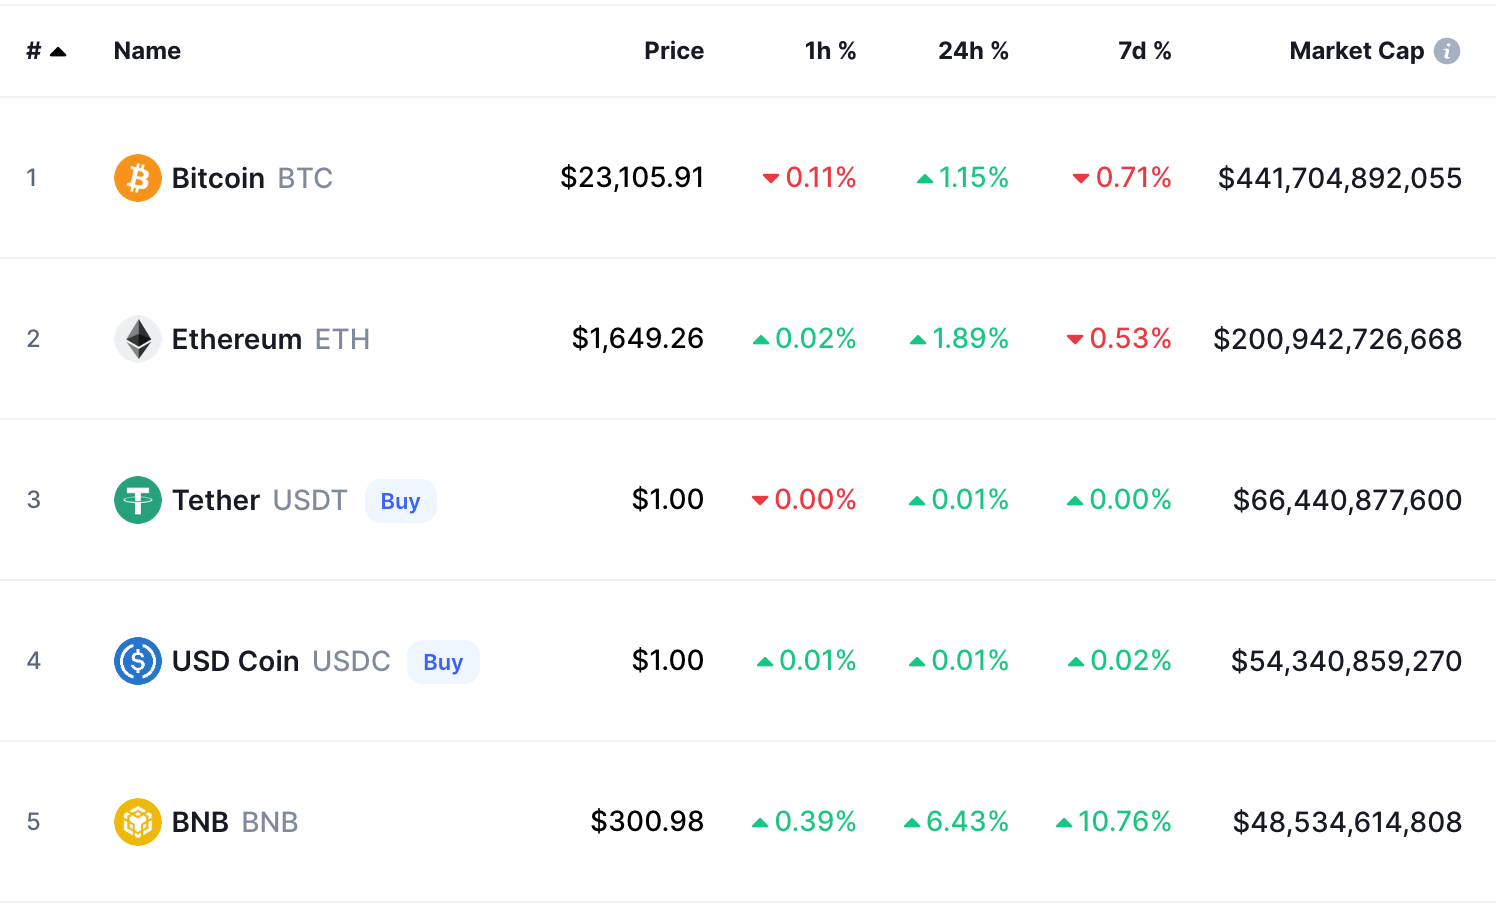 The top five cryptocurrencies by market cap as of August 3, 2022 – Bitcoin, Ethereum, Tether, USD Coin, and BNB